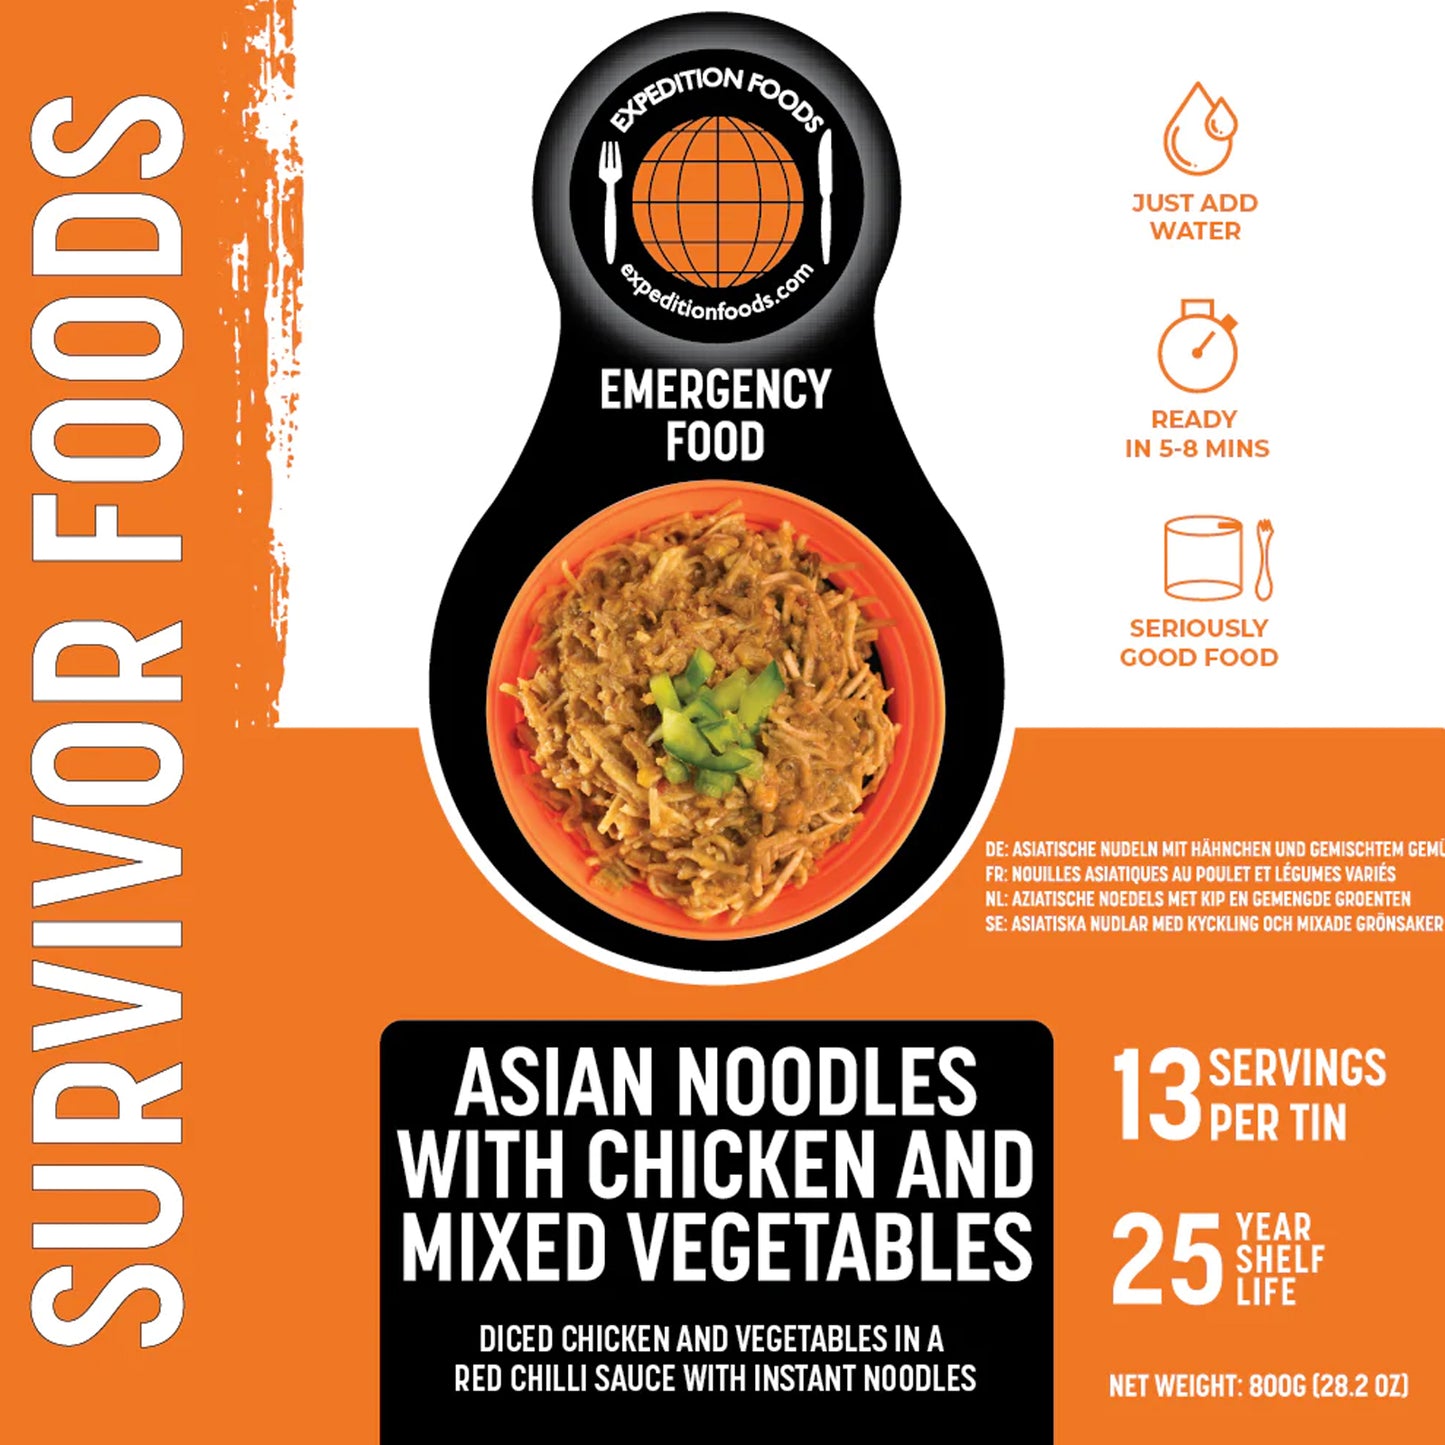 Expedition Foods Asian Noodles with Chicken and Vegetables